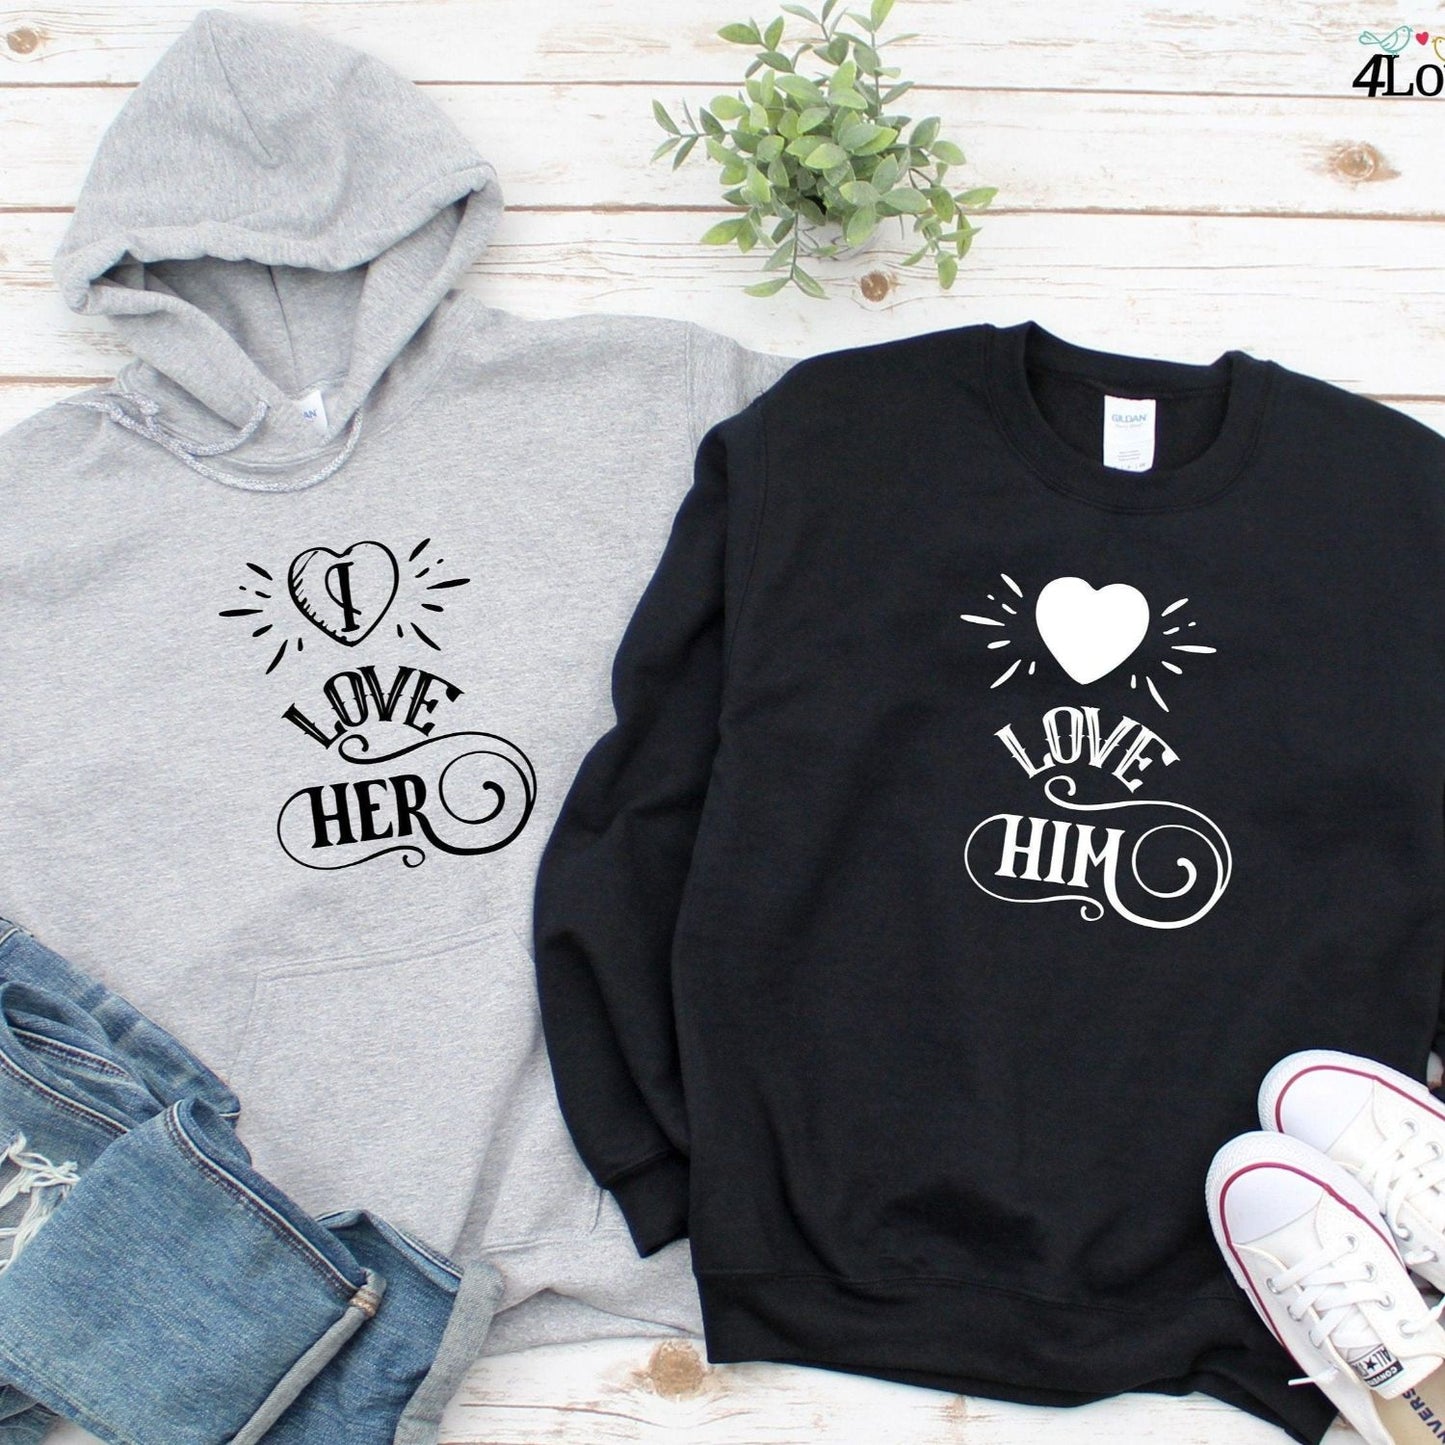 Adorable His & Hers Matching Set - Valentine Couple's Gift, Expressing Love - Fun Outfits